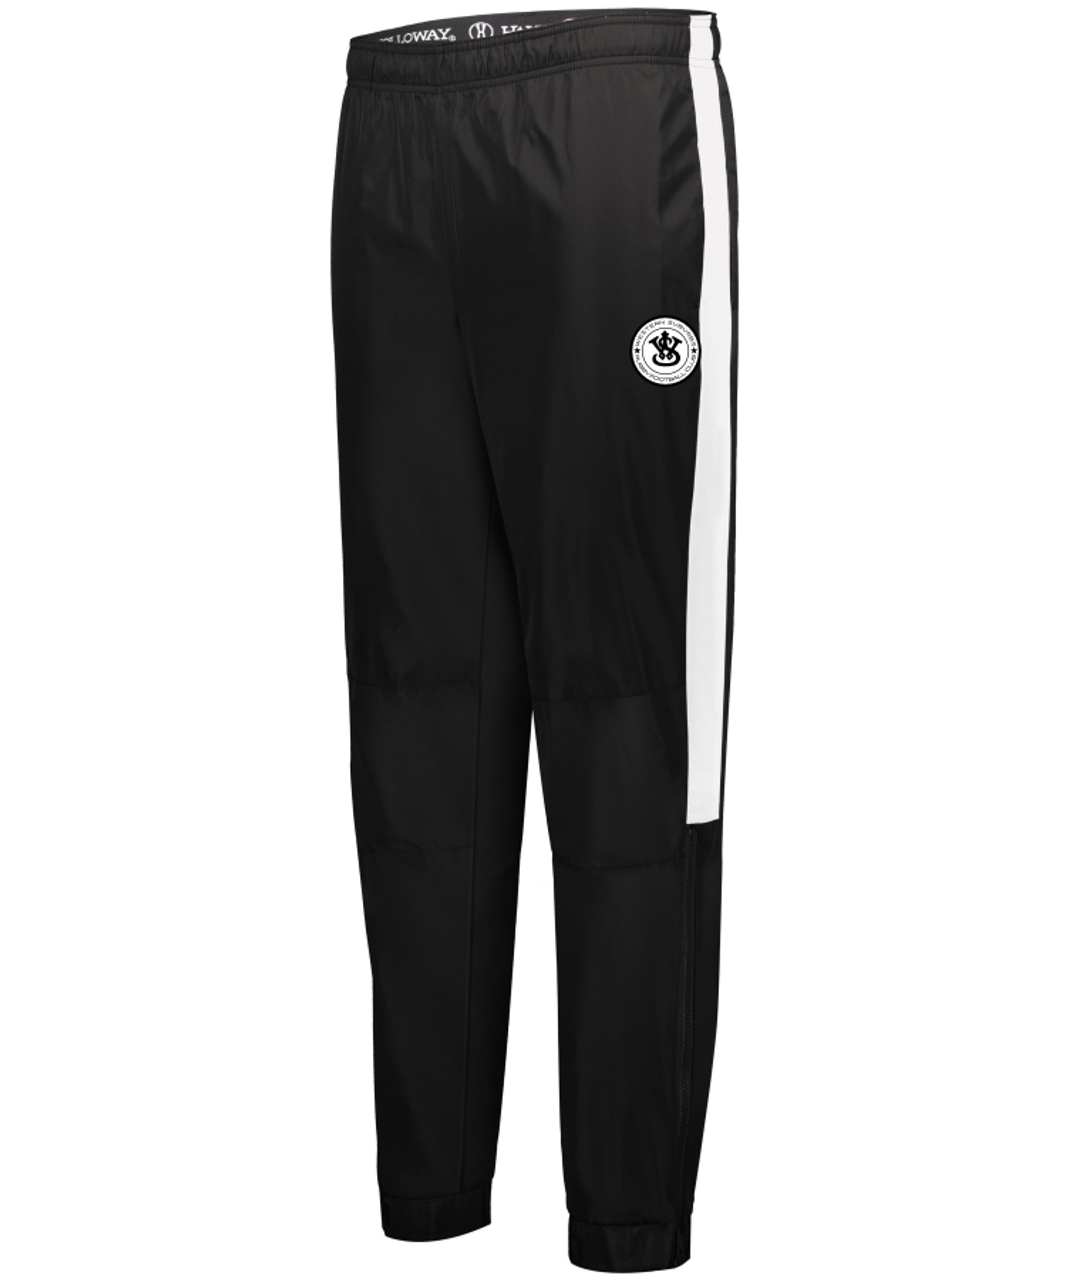 Western Suburbs Warm Up/Trainer Pant